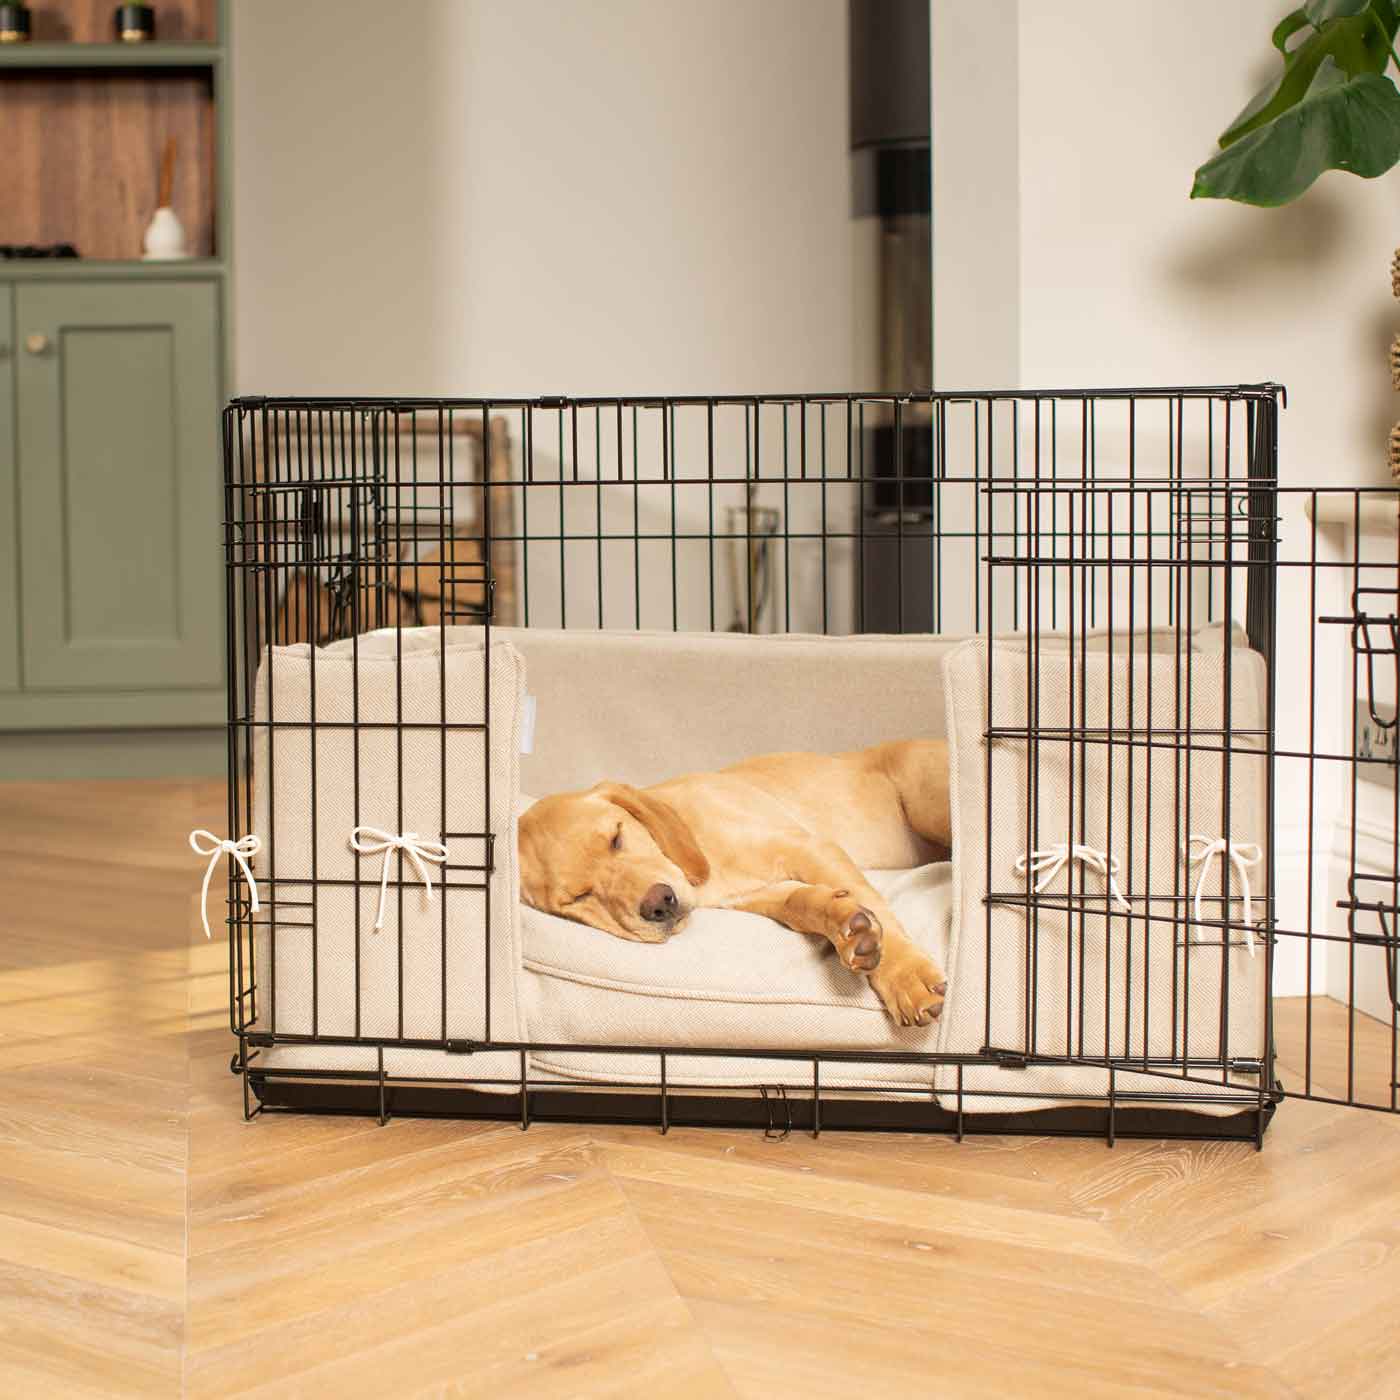 Discover our Luxury Dog Crate Bumper, in Natural Herringbone. The Perfect Dog Crate Accessory, Available To Personalise Now at Lords & Labradors